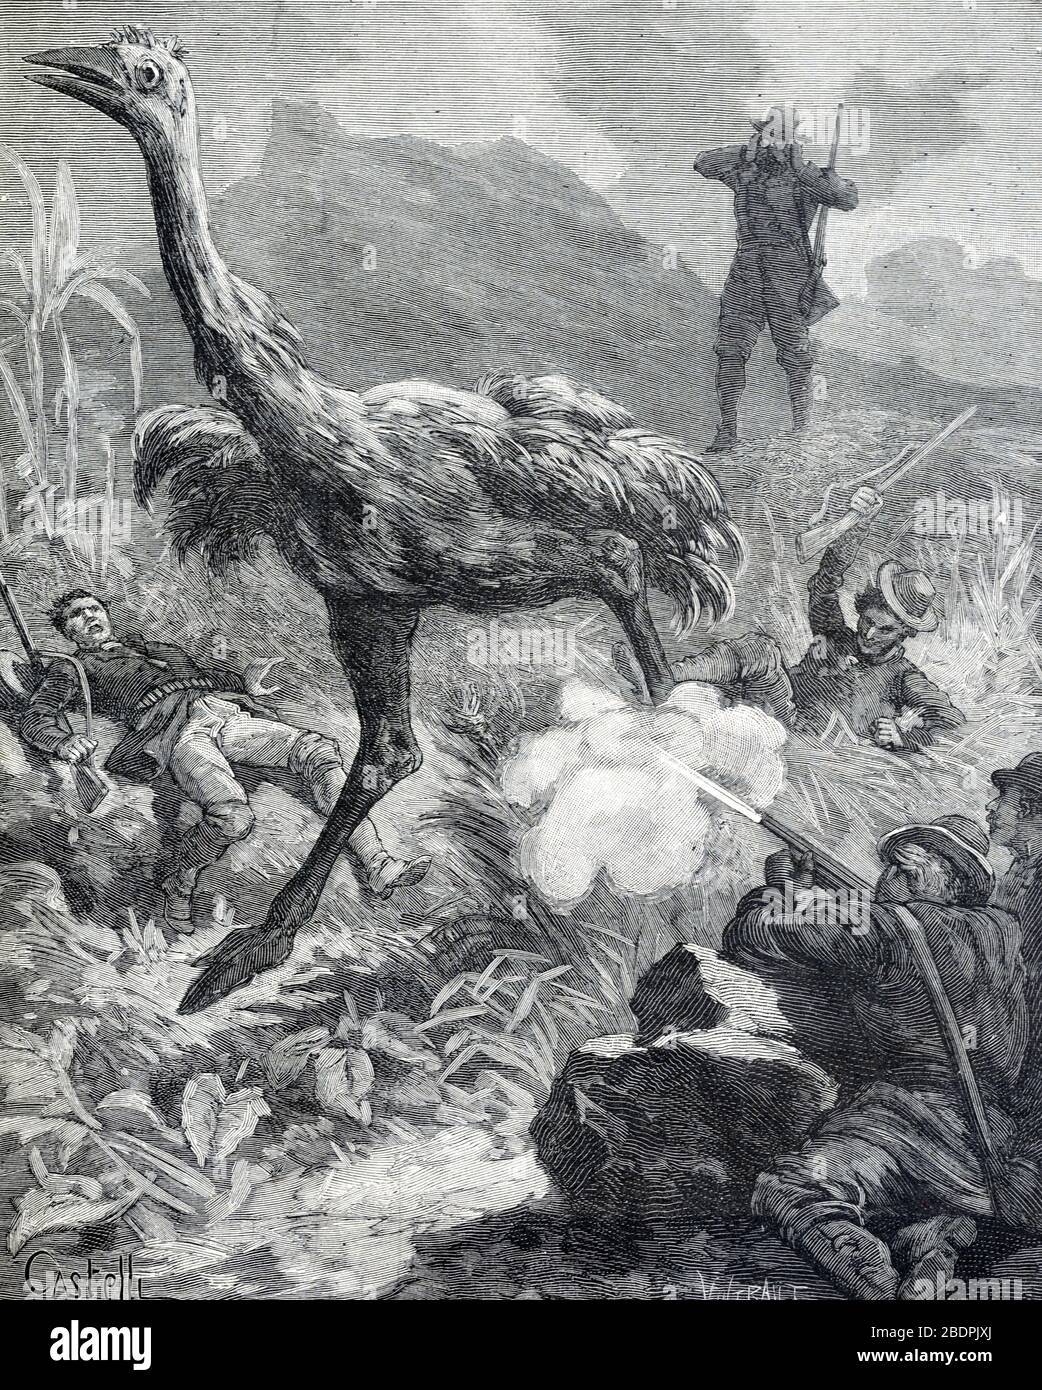 Hunting Moa, an Extinct Flightless Bird, in New Zealand or Oceania . Vintage or Old Illustration or Engraving 1886 Stock Photo